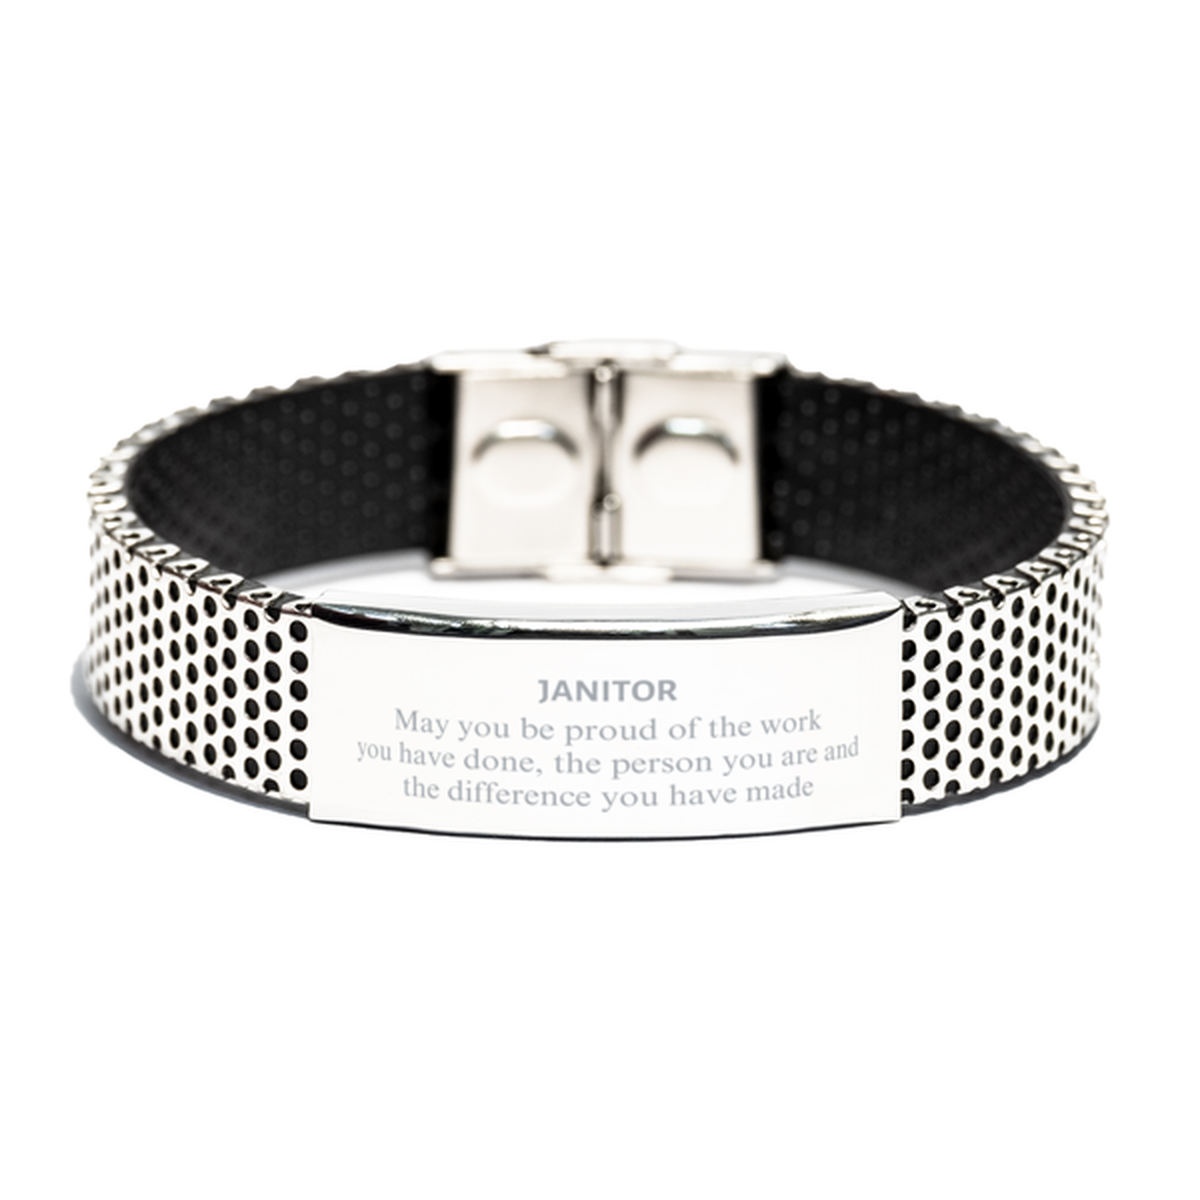 Janitor May you be proud of the work you have done, Retirement Janitor Stainless Steel Bracelet for Colleague Appreciation Gifts Amazing for Janitor